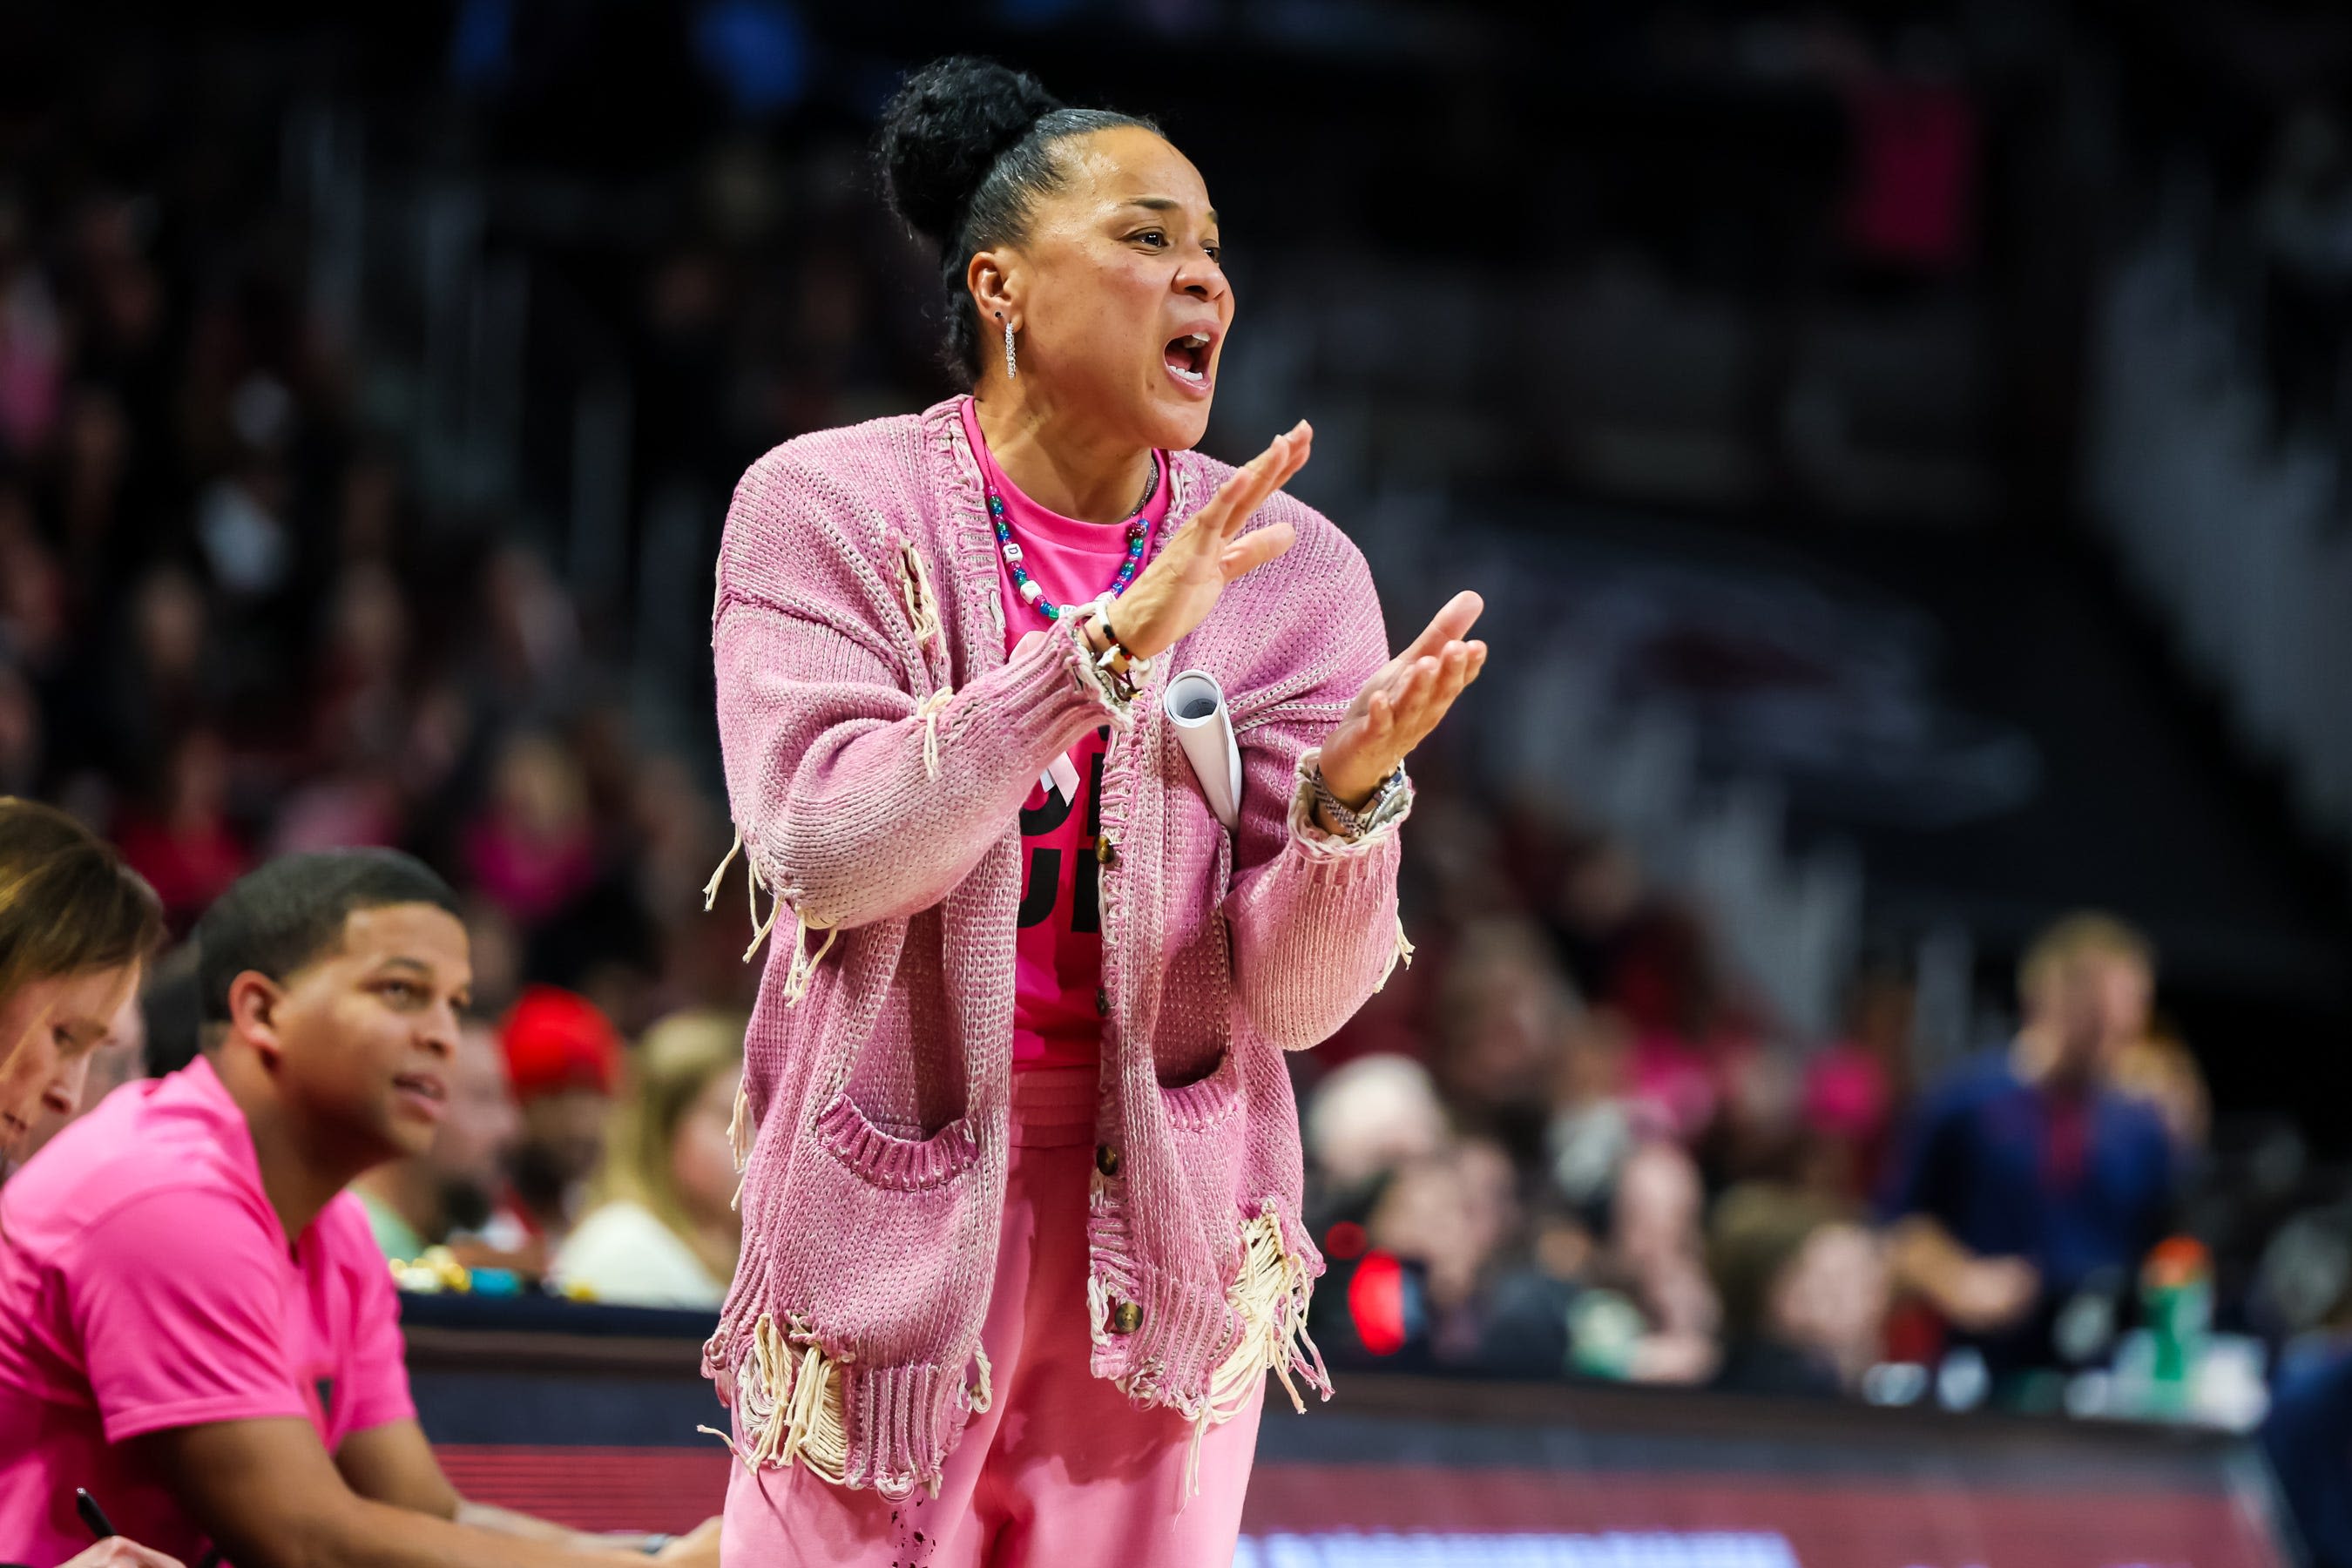 South Carolina coach Dawn Staley's 1st day at 2024 Paris Olympics was 'Presidential for me'